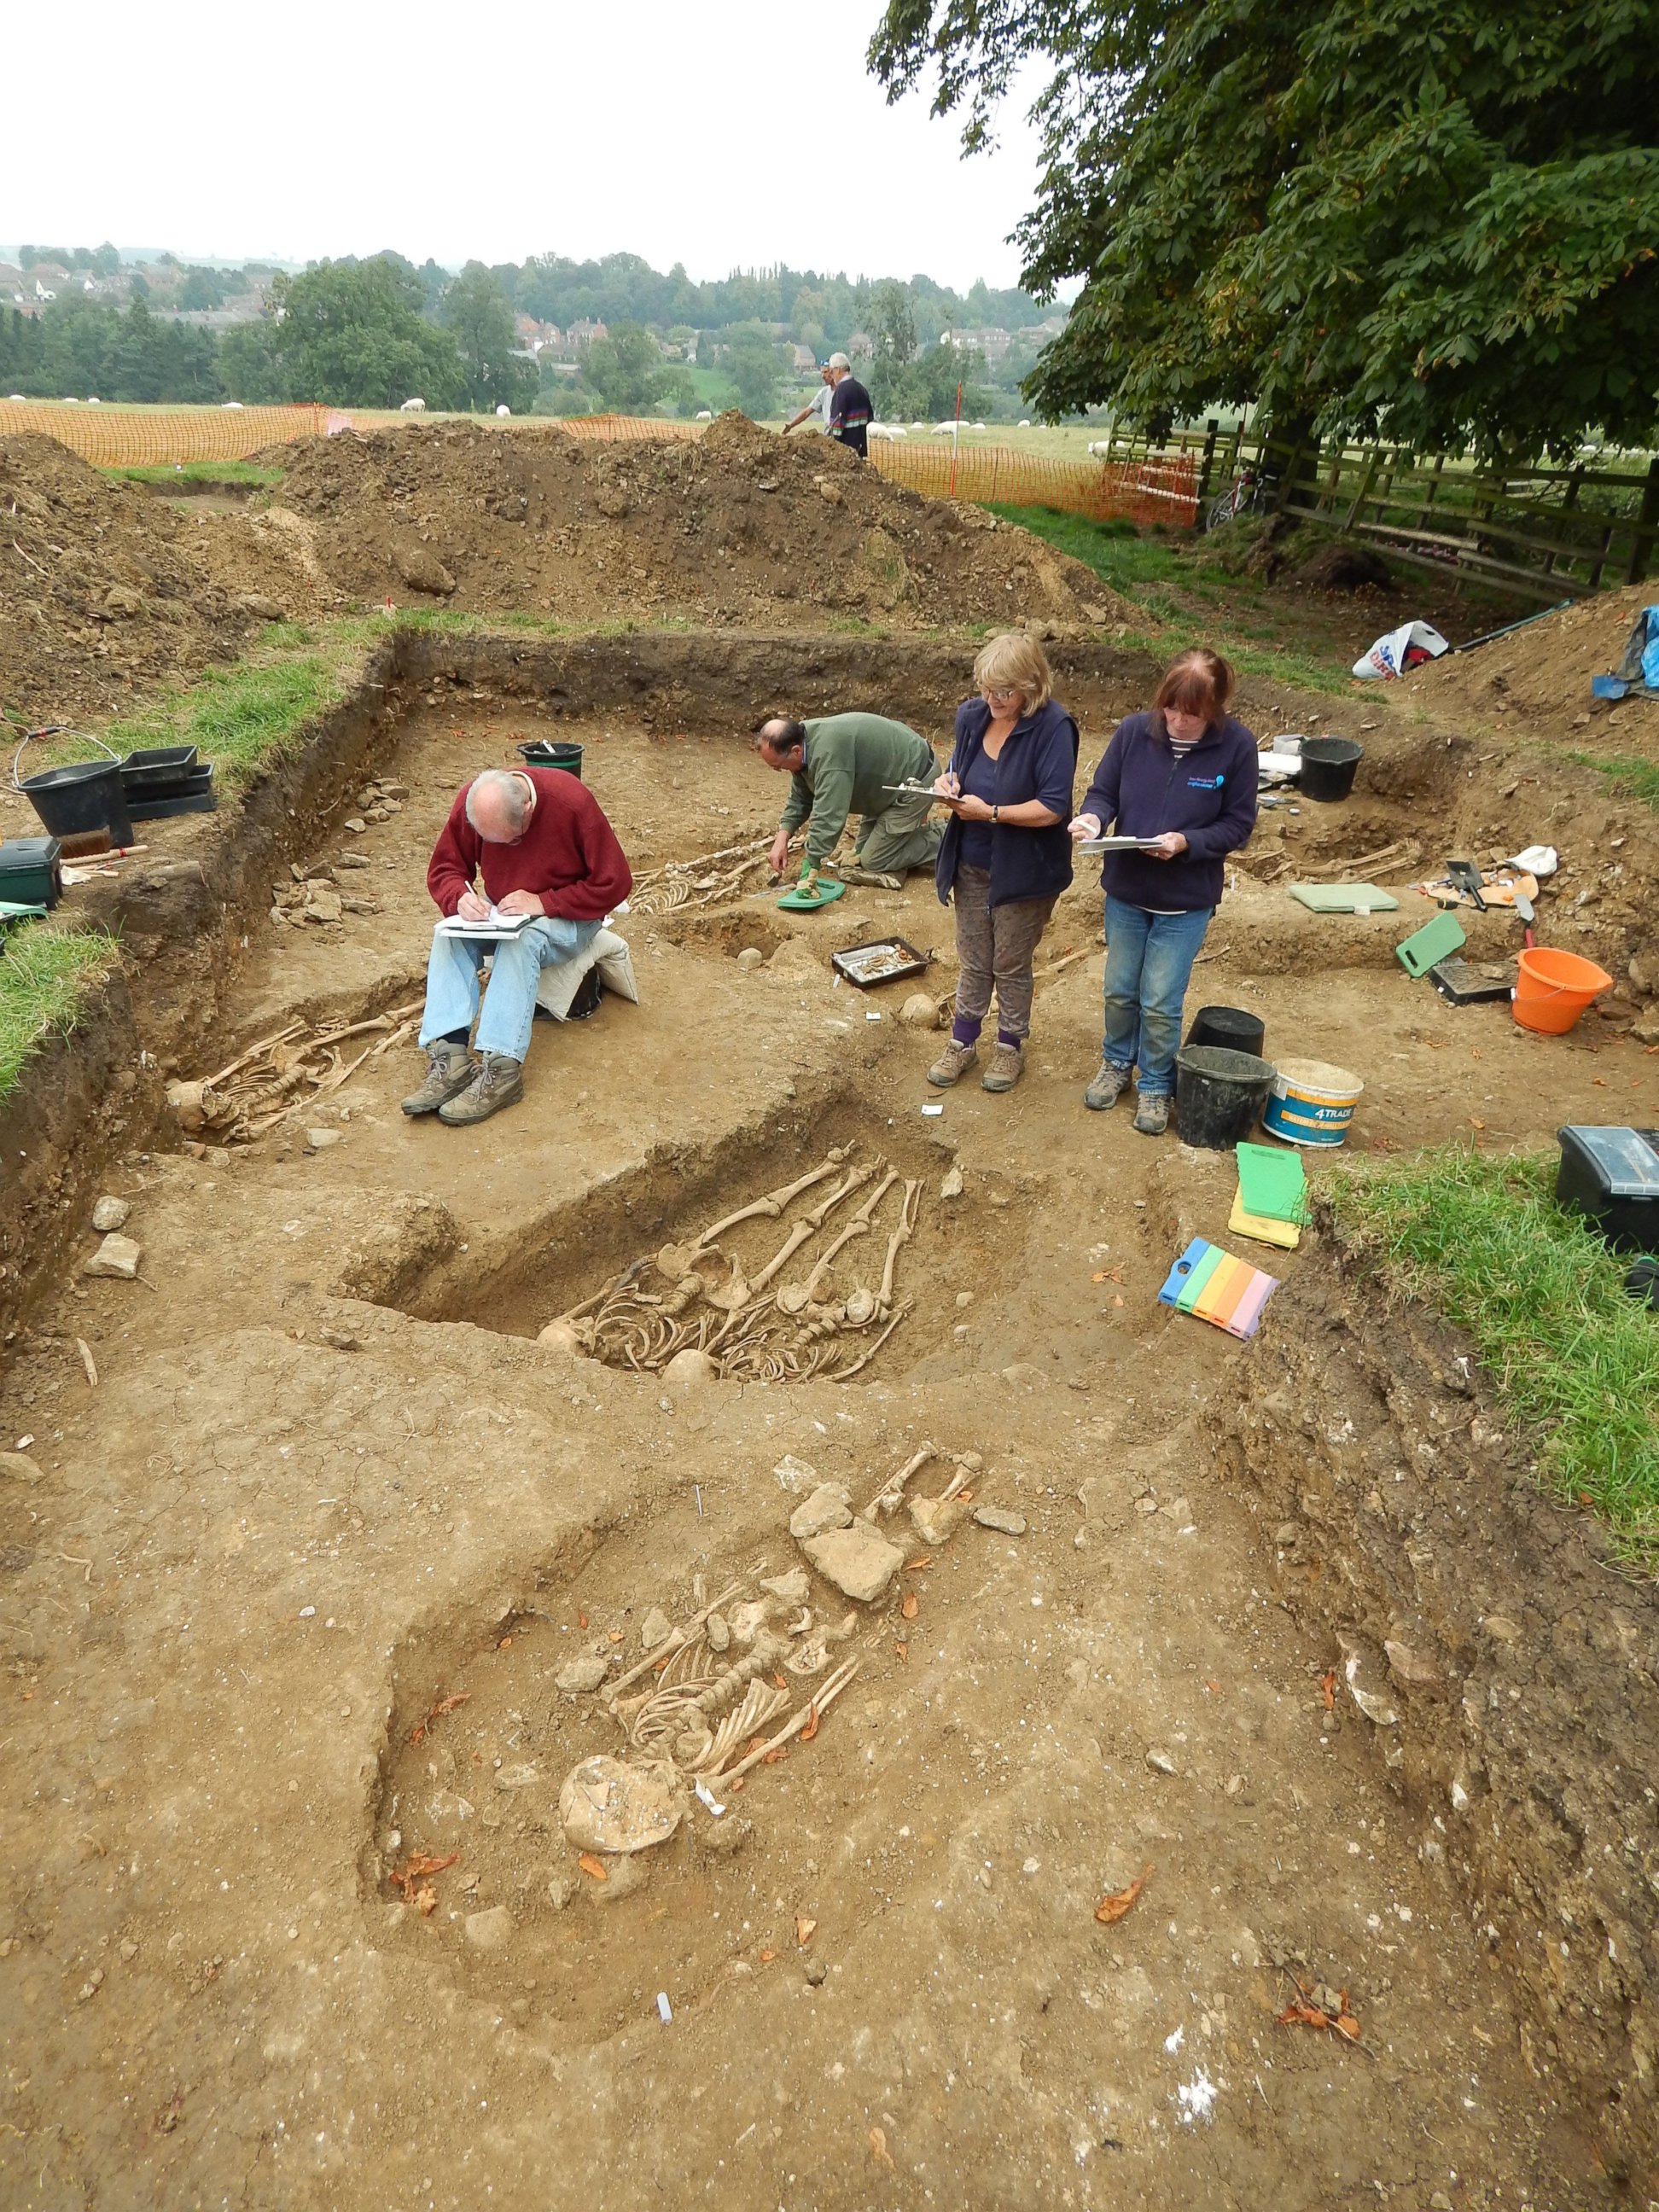 PHOTO: The skeletons, dating to the 14th century, have been dated by radiocarbon. Archaeologists believe the site may have been a special place of burial, possibly for pilgrims. 